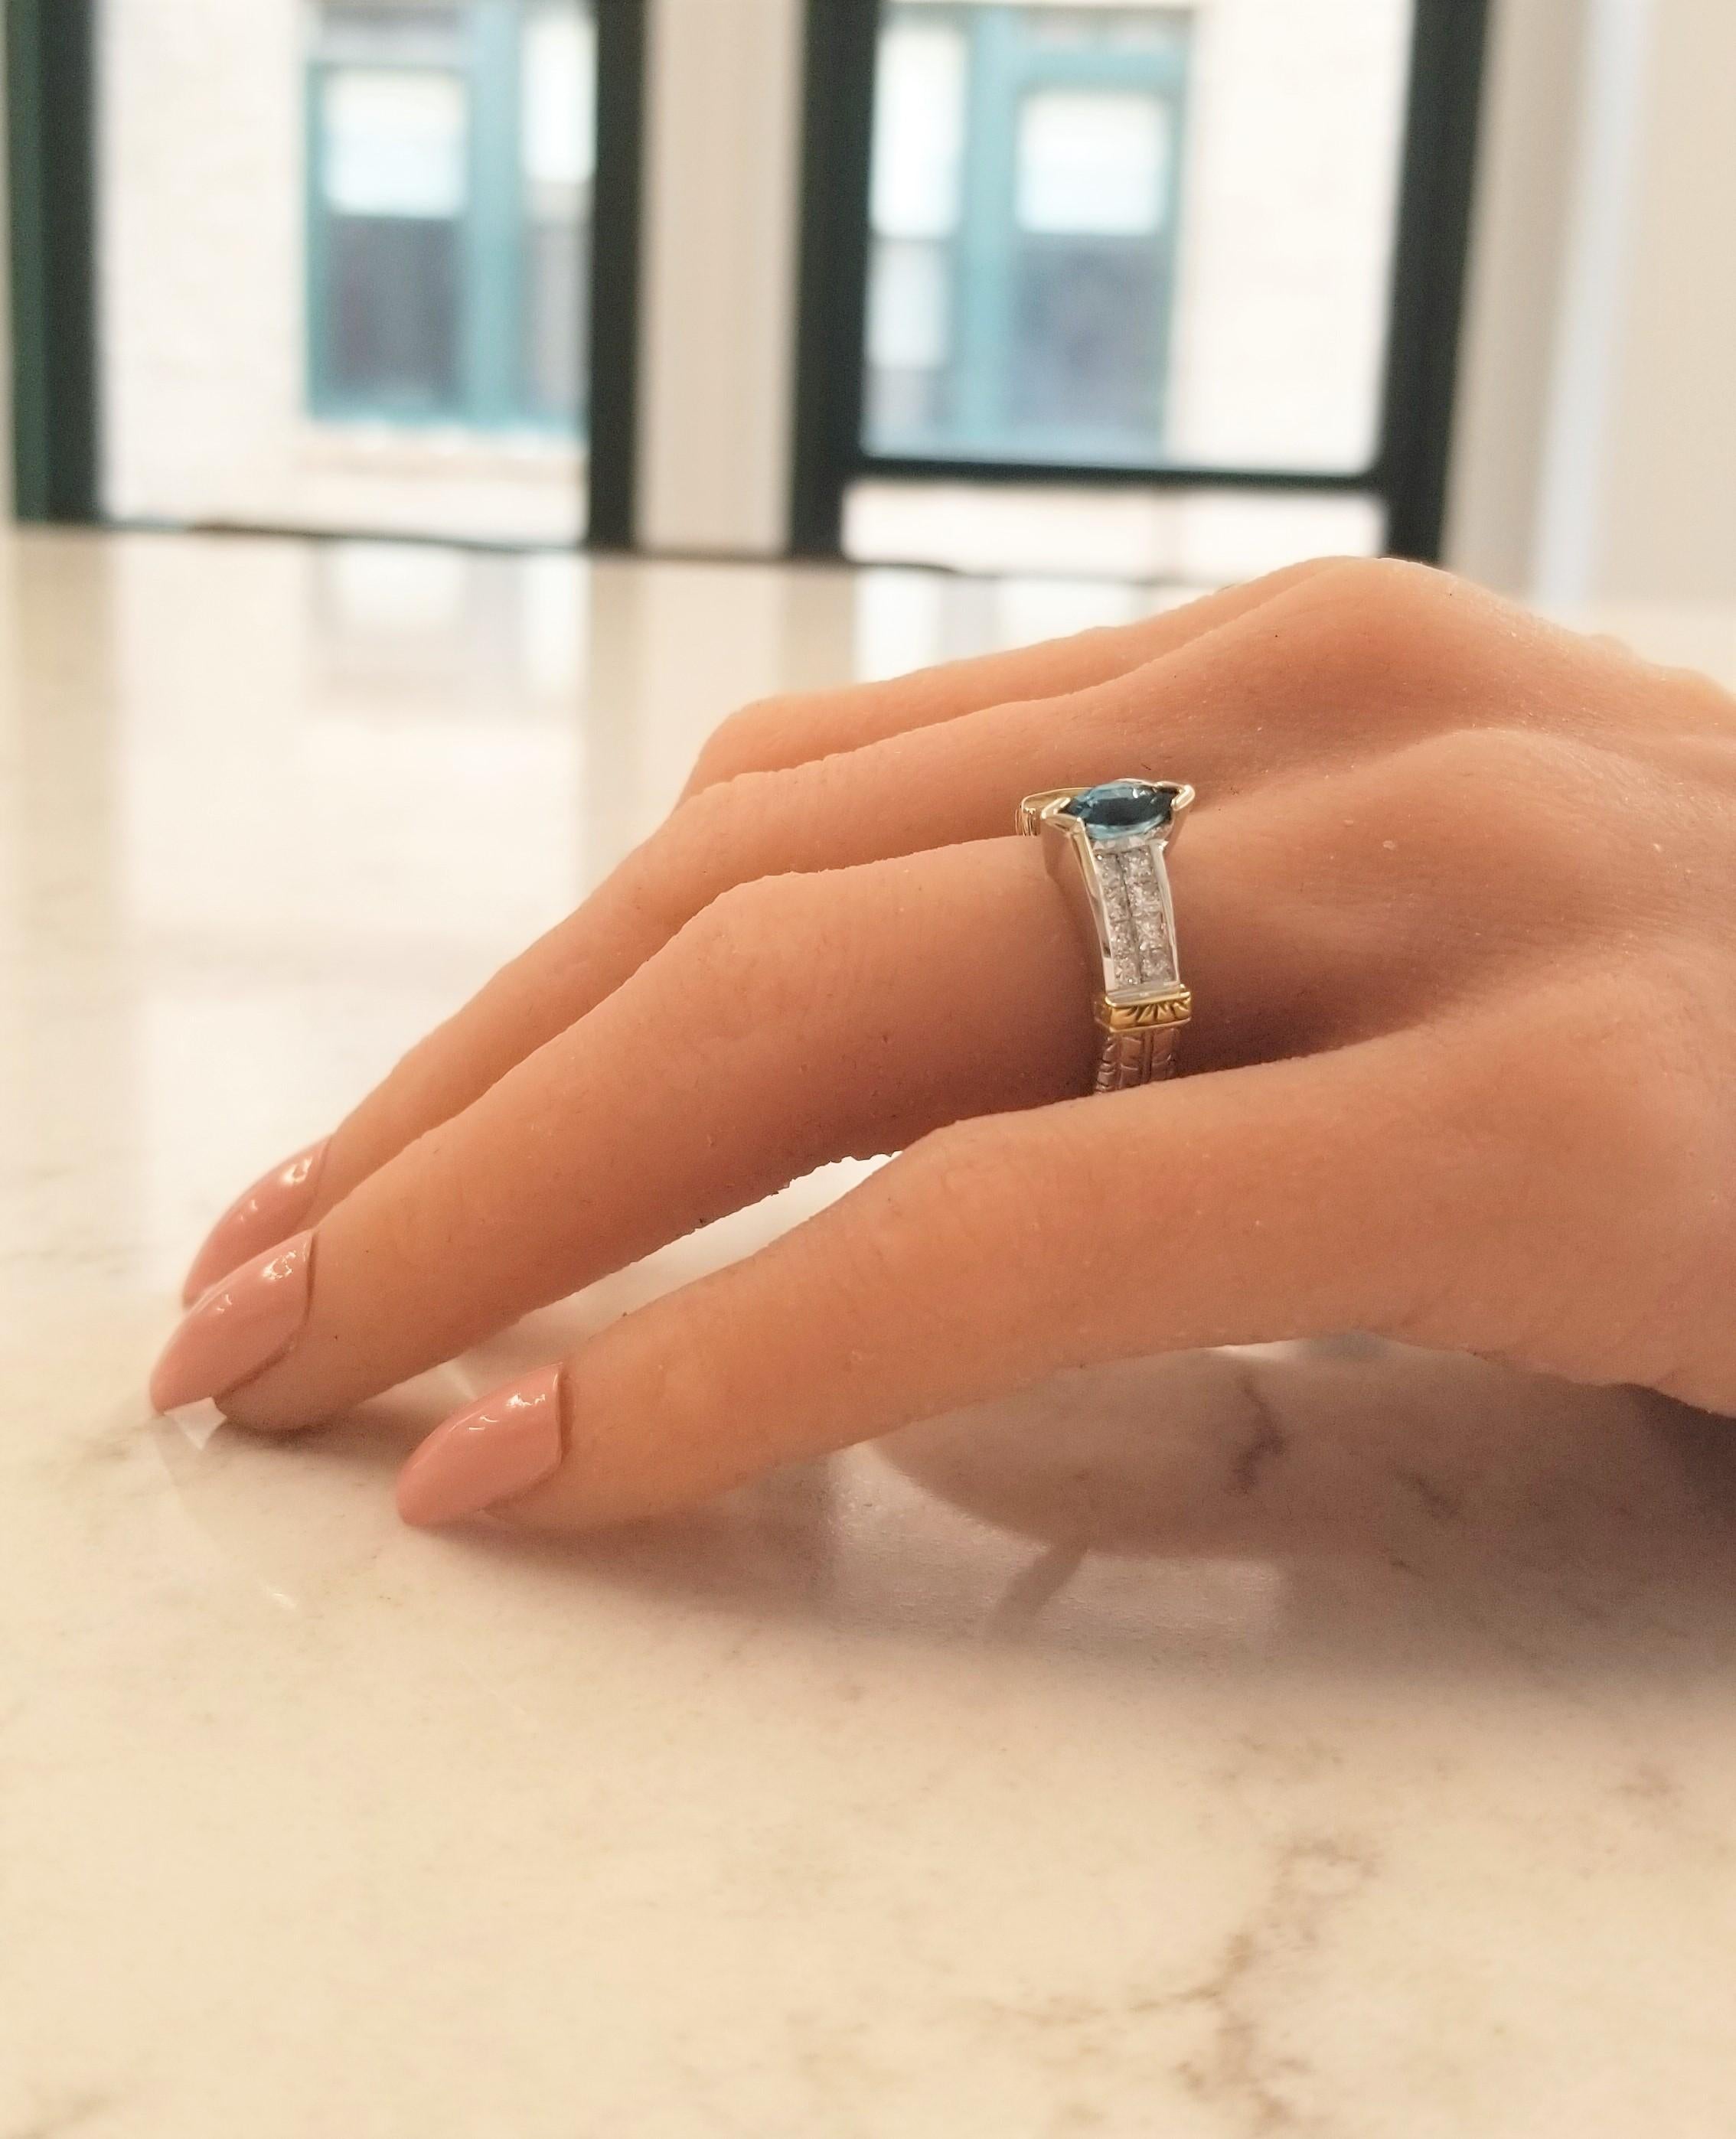 Blue Topaz and diamonds unite, to create this outrageously stunning ring. The richly hued and distinctively designed 18 Karat white and yellow gold mounting is unique and elegant. The combination of gold creates a dynamic look. It securely holds a